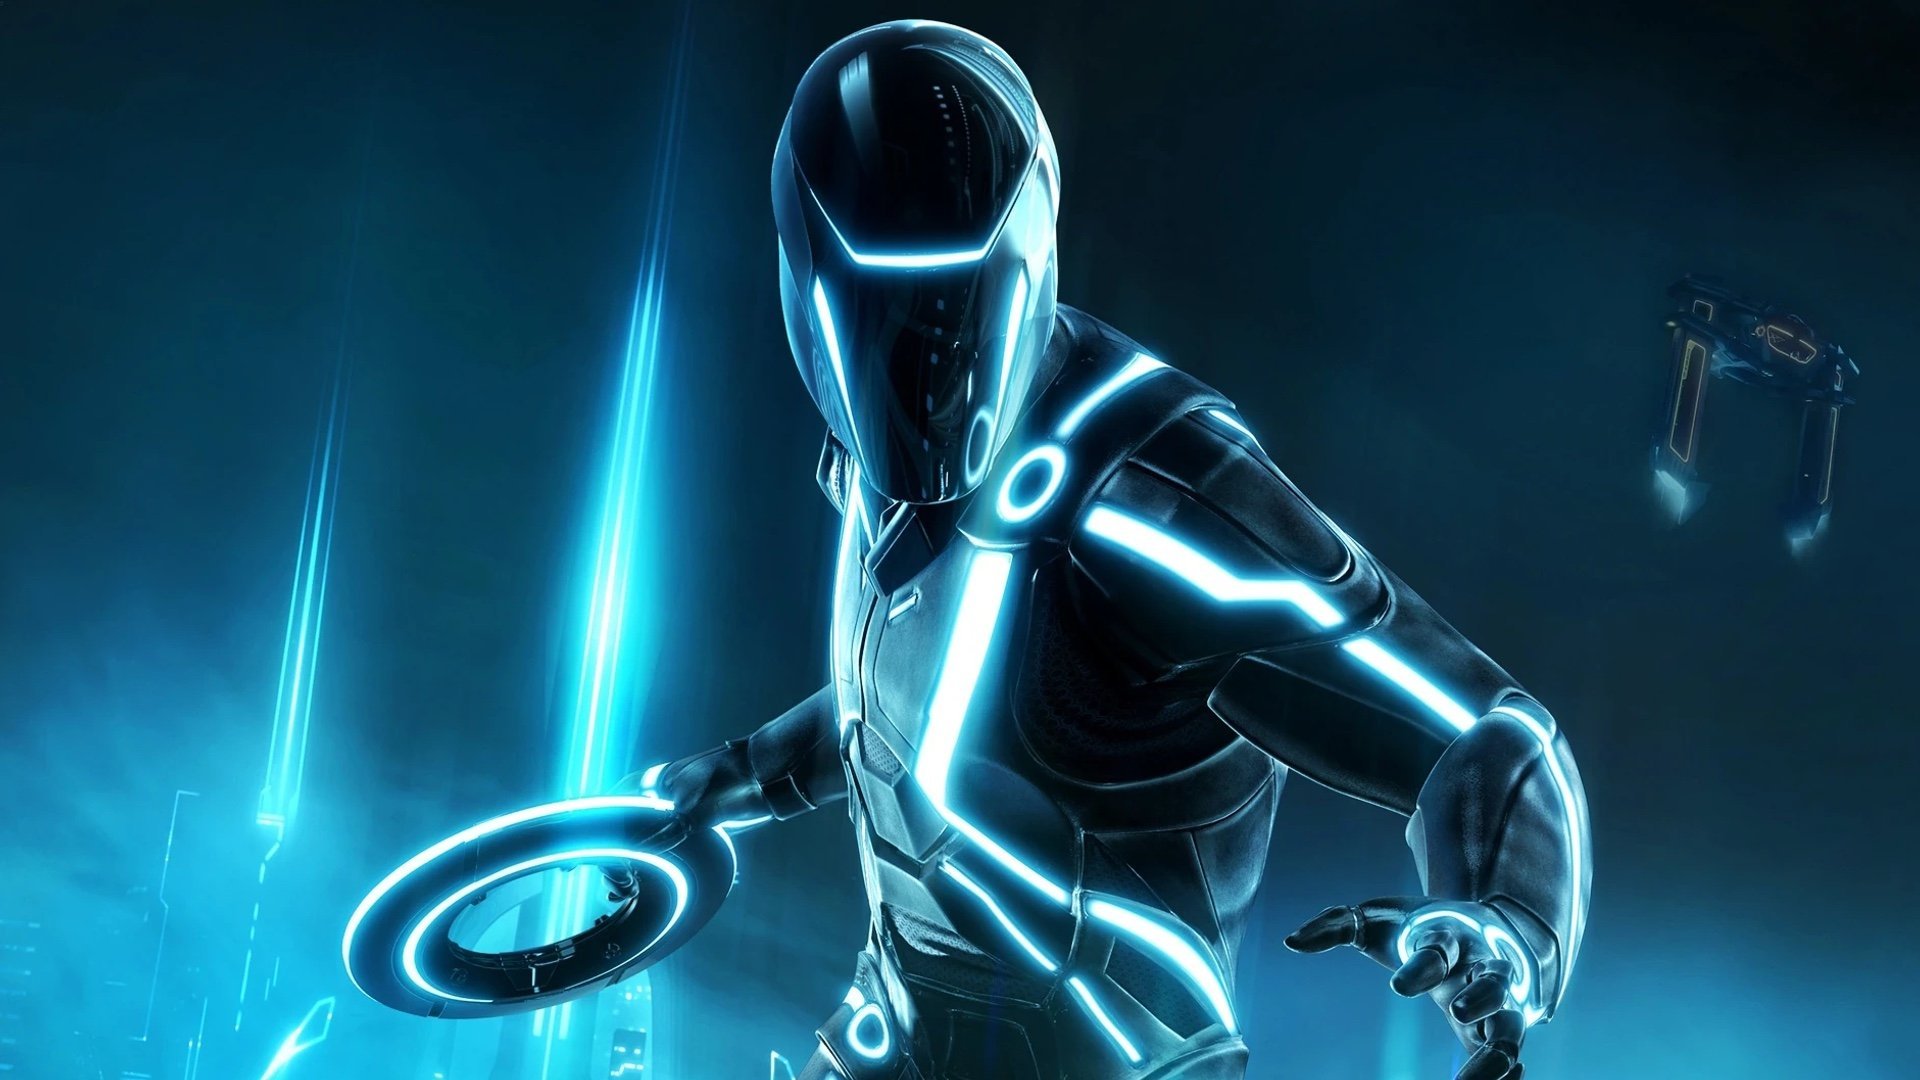 tron ares producer offers update on third film and says it feels like the right time